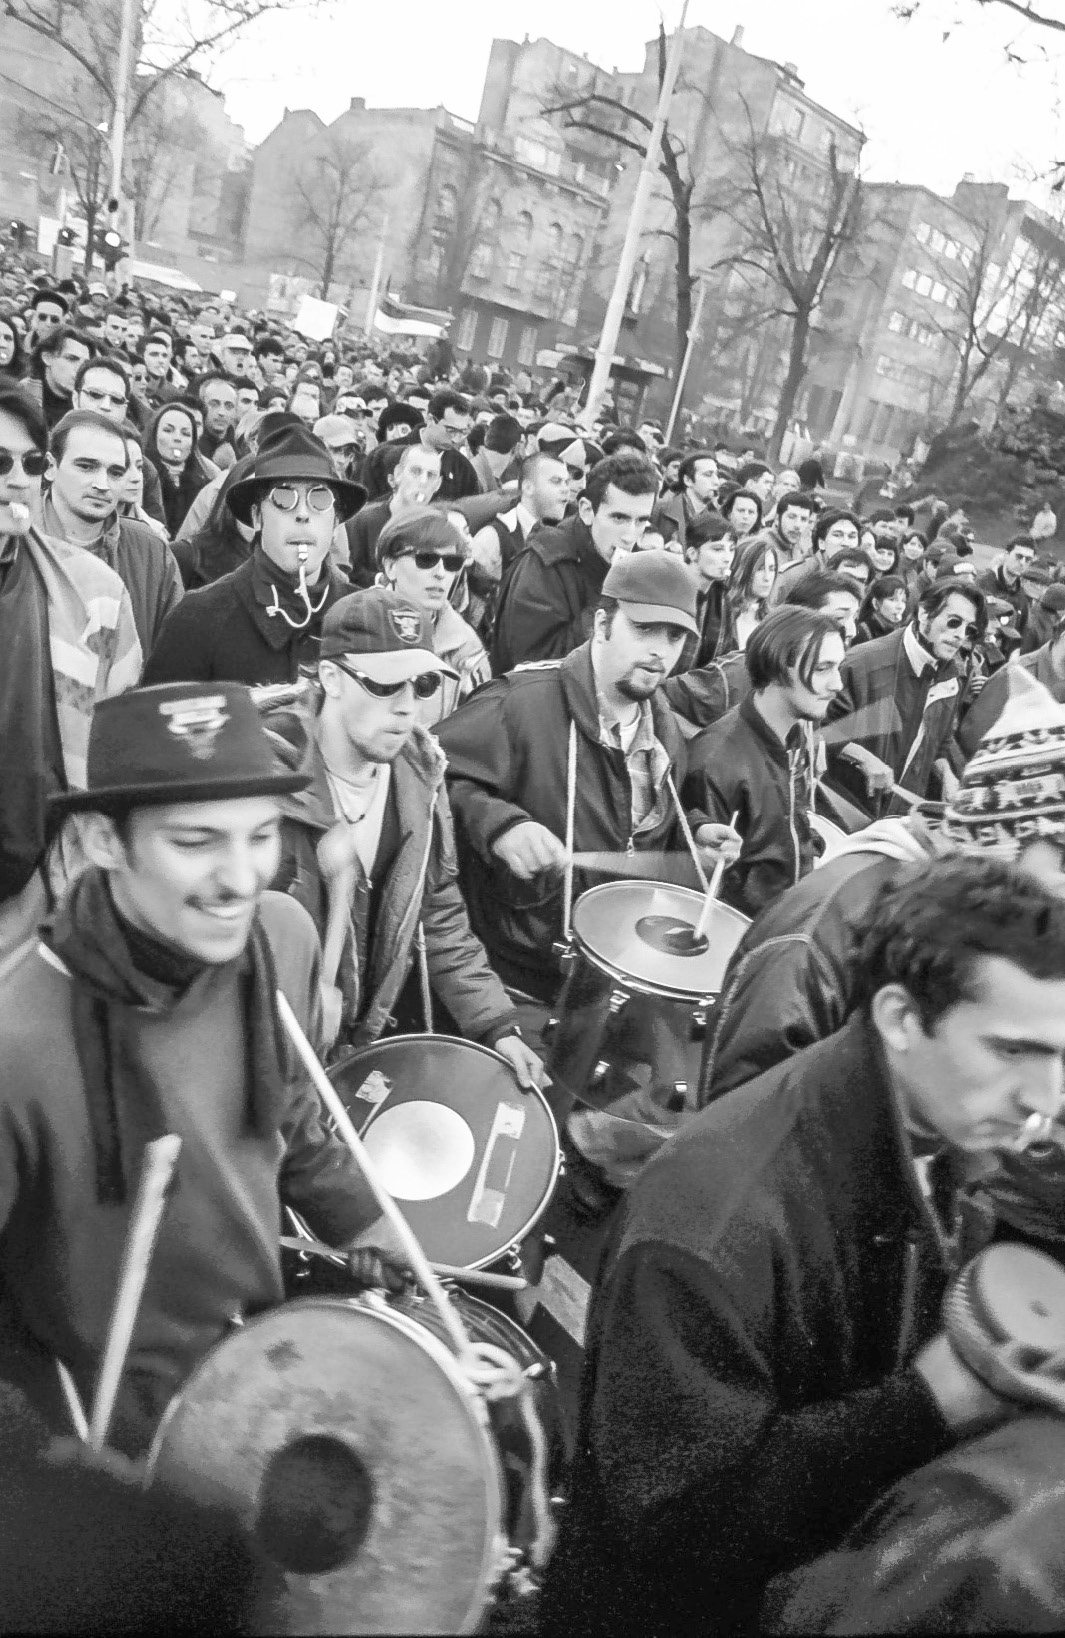 A large crowd of people, some playing percussion instruments and whistles in the foreground, in the background appartment buildings of varied dimensions and street-lining trees without leaves.